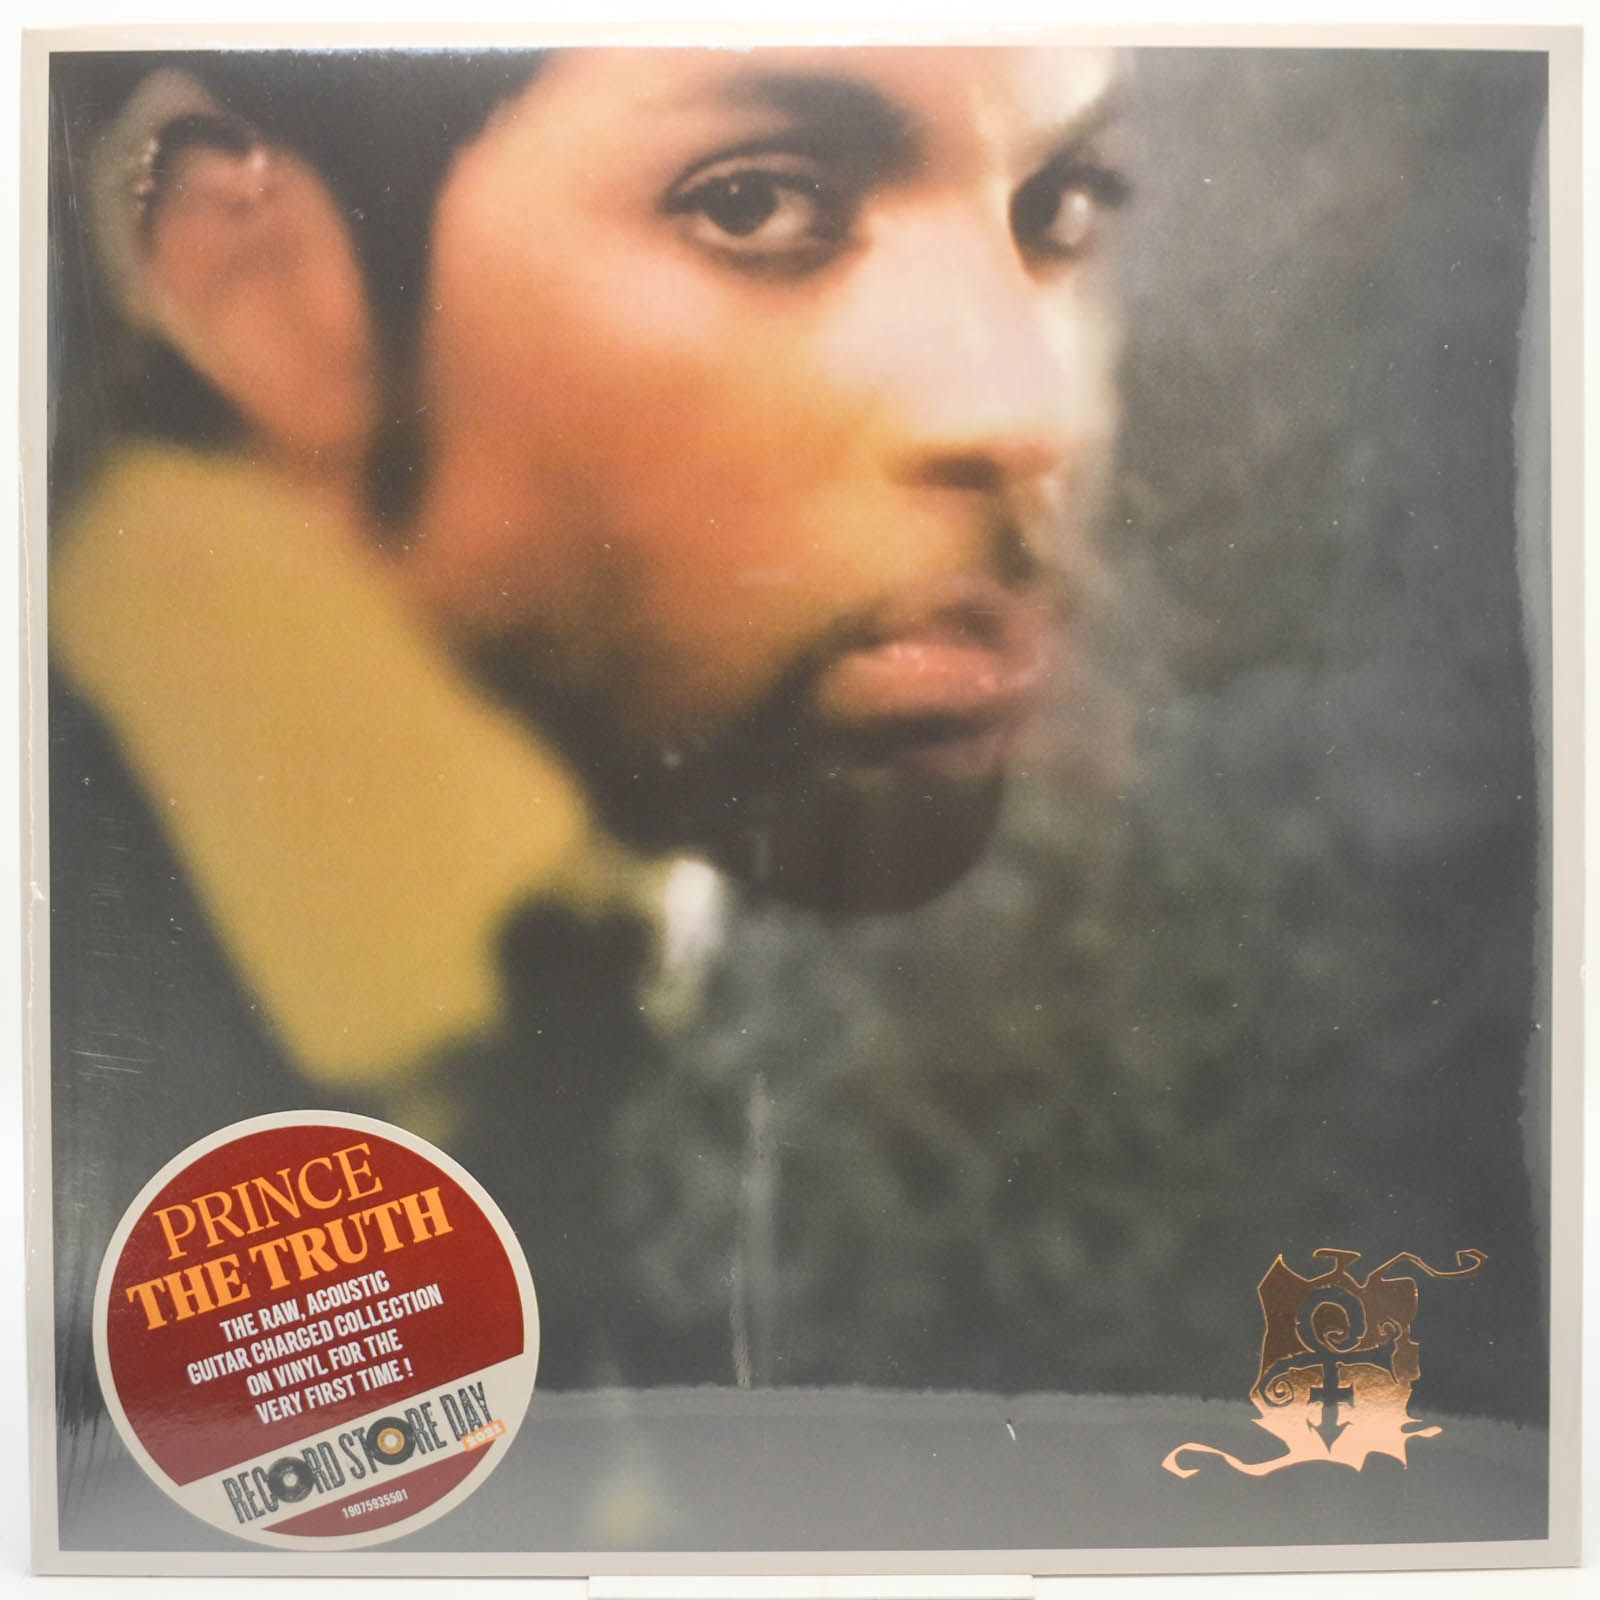 Artist (Formerly Known As Prince) — The Truth, 1987